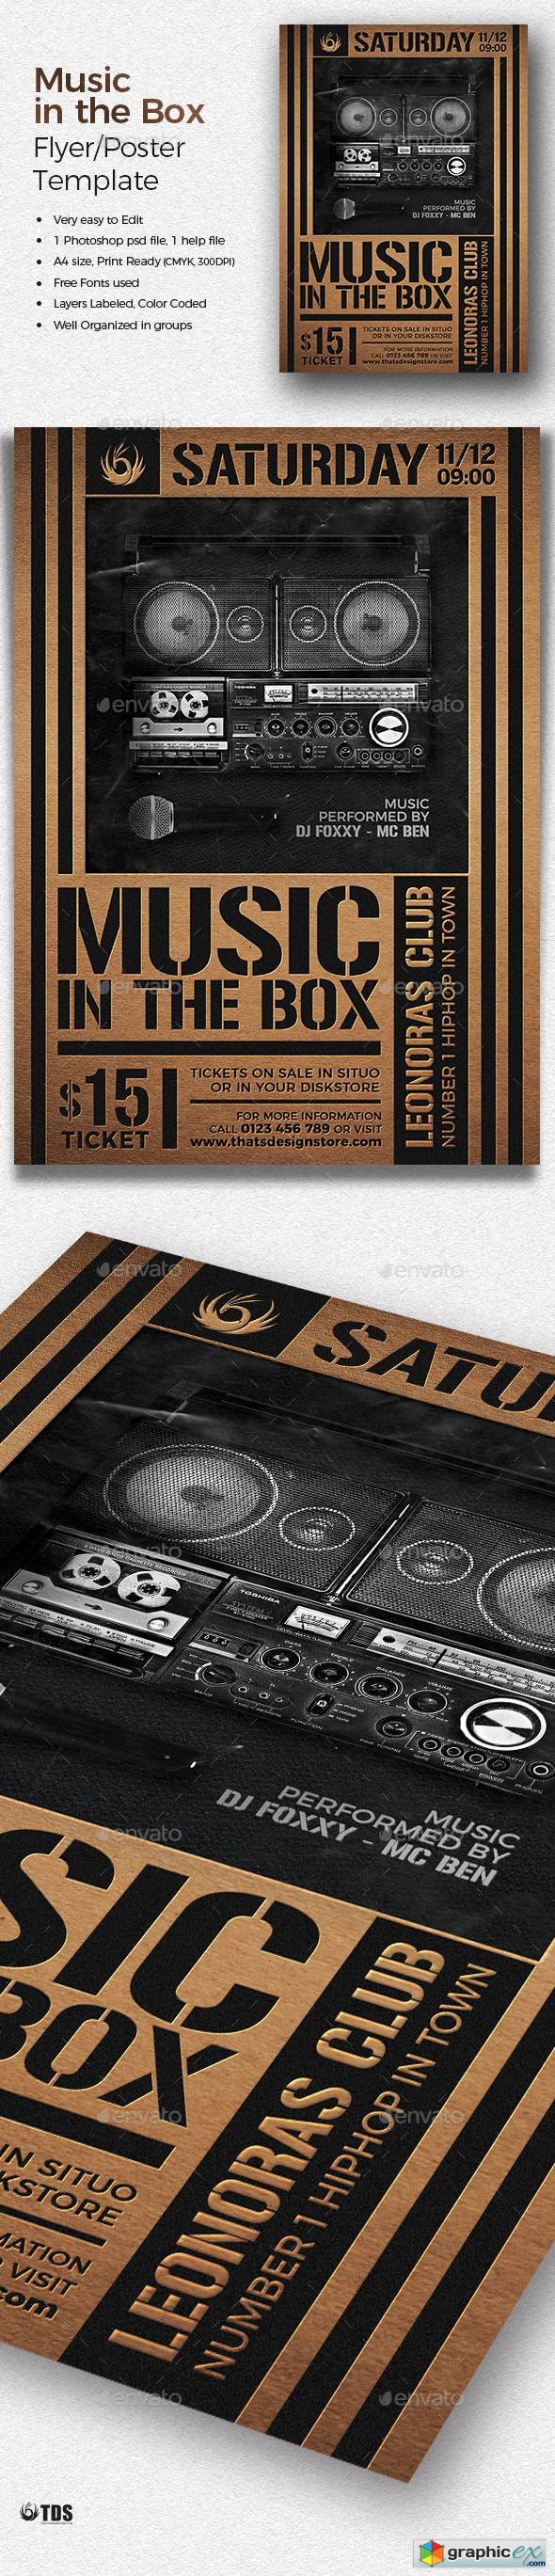 Music in the Box Flyer Template